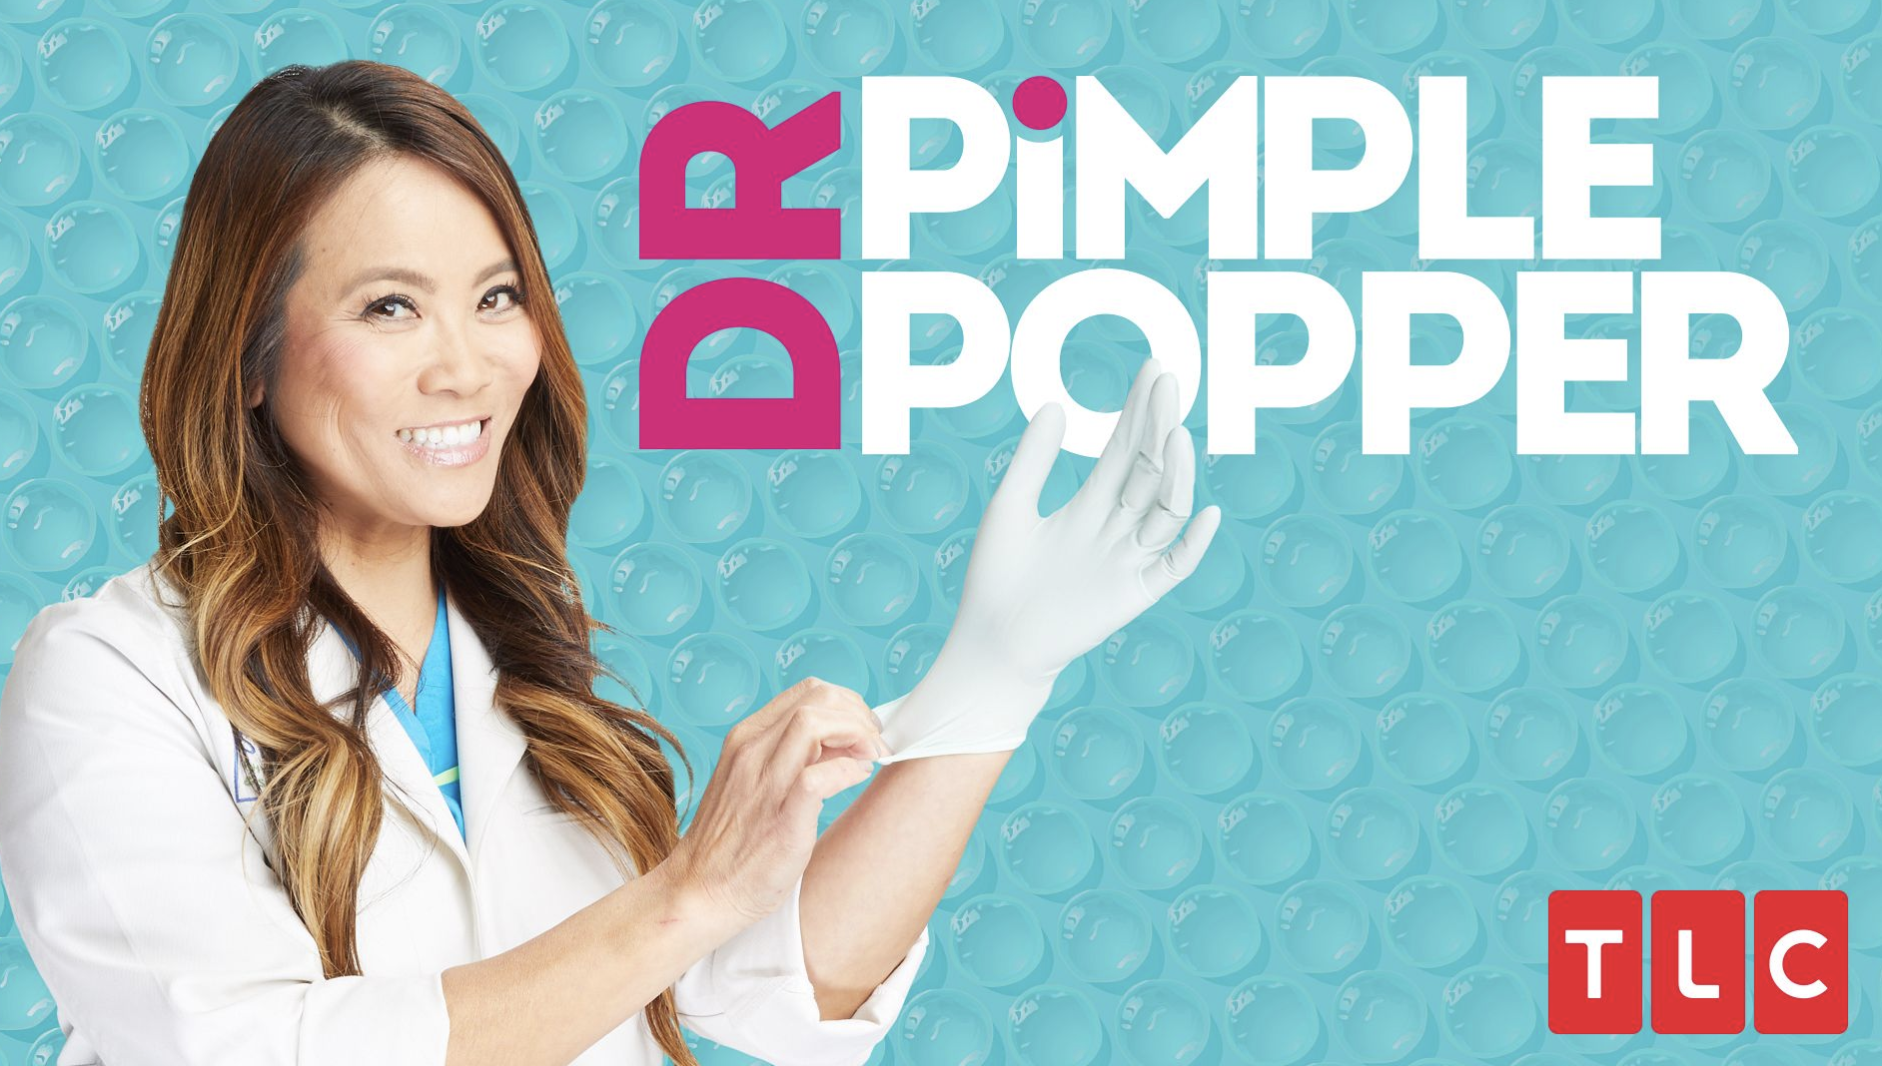 The Very Best Dr Pimple Popper Pops!